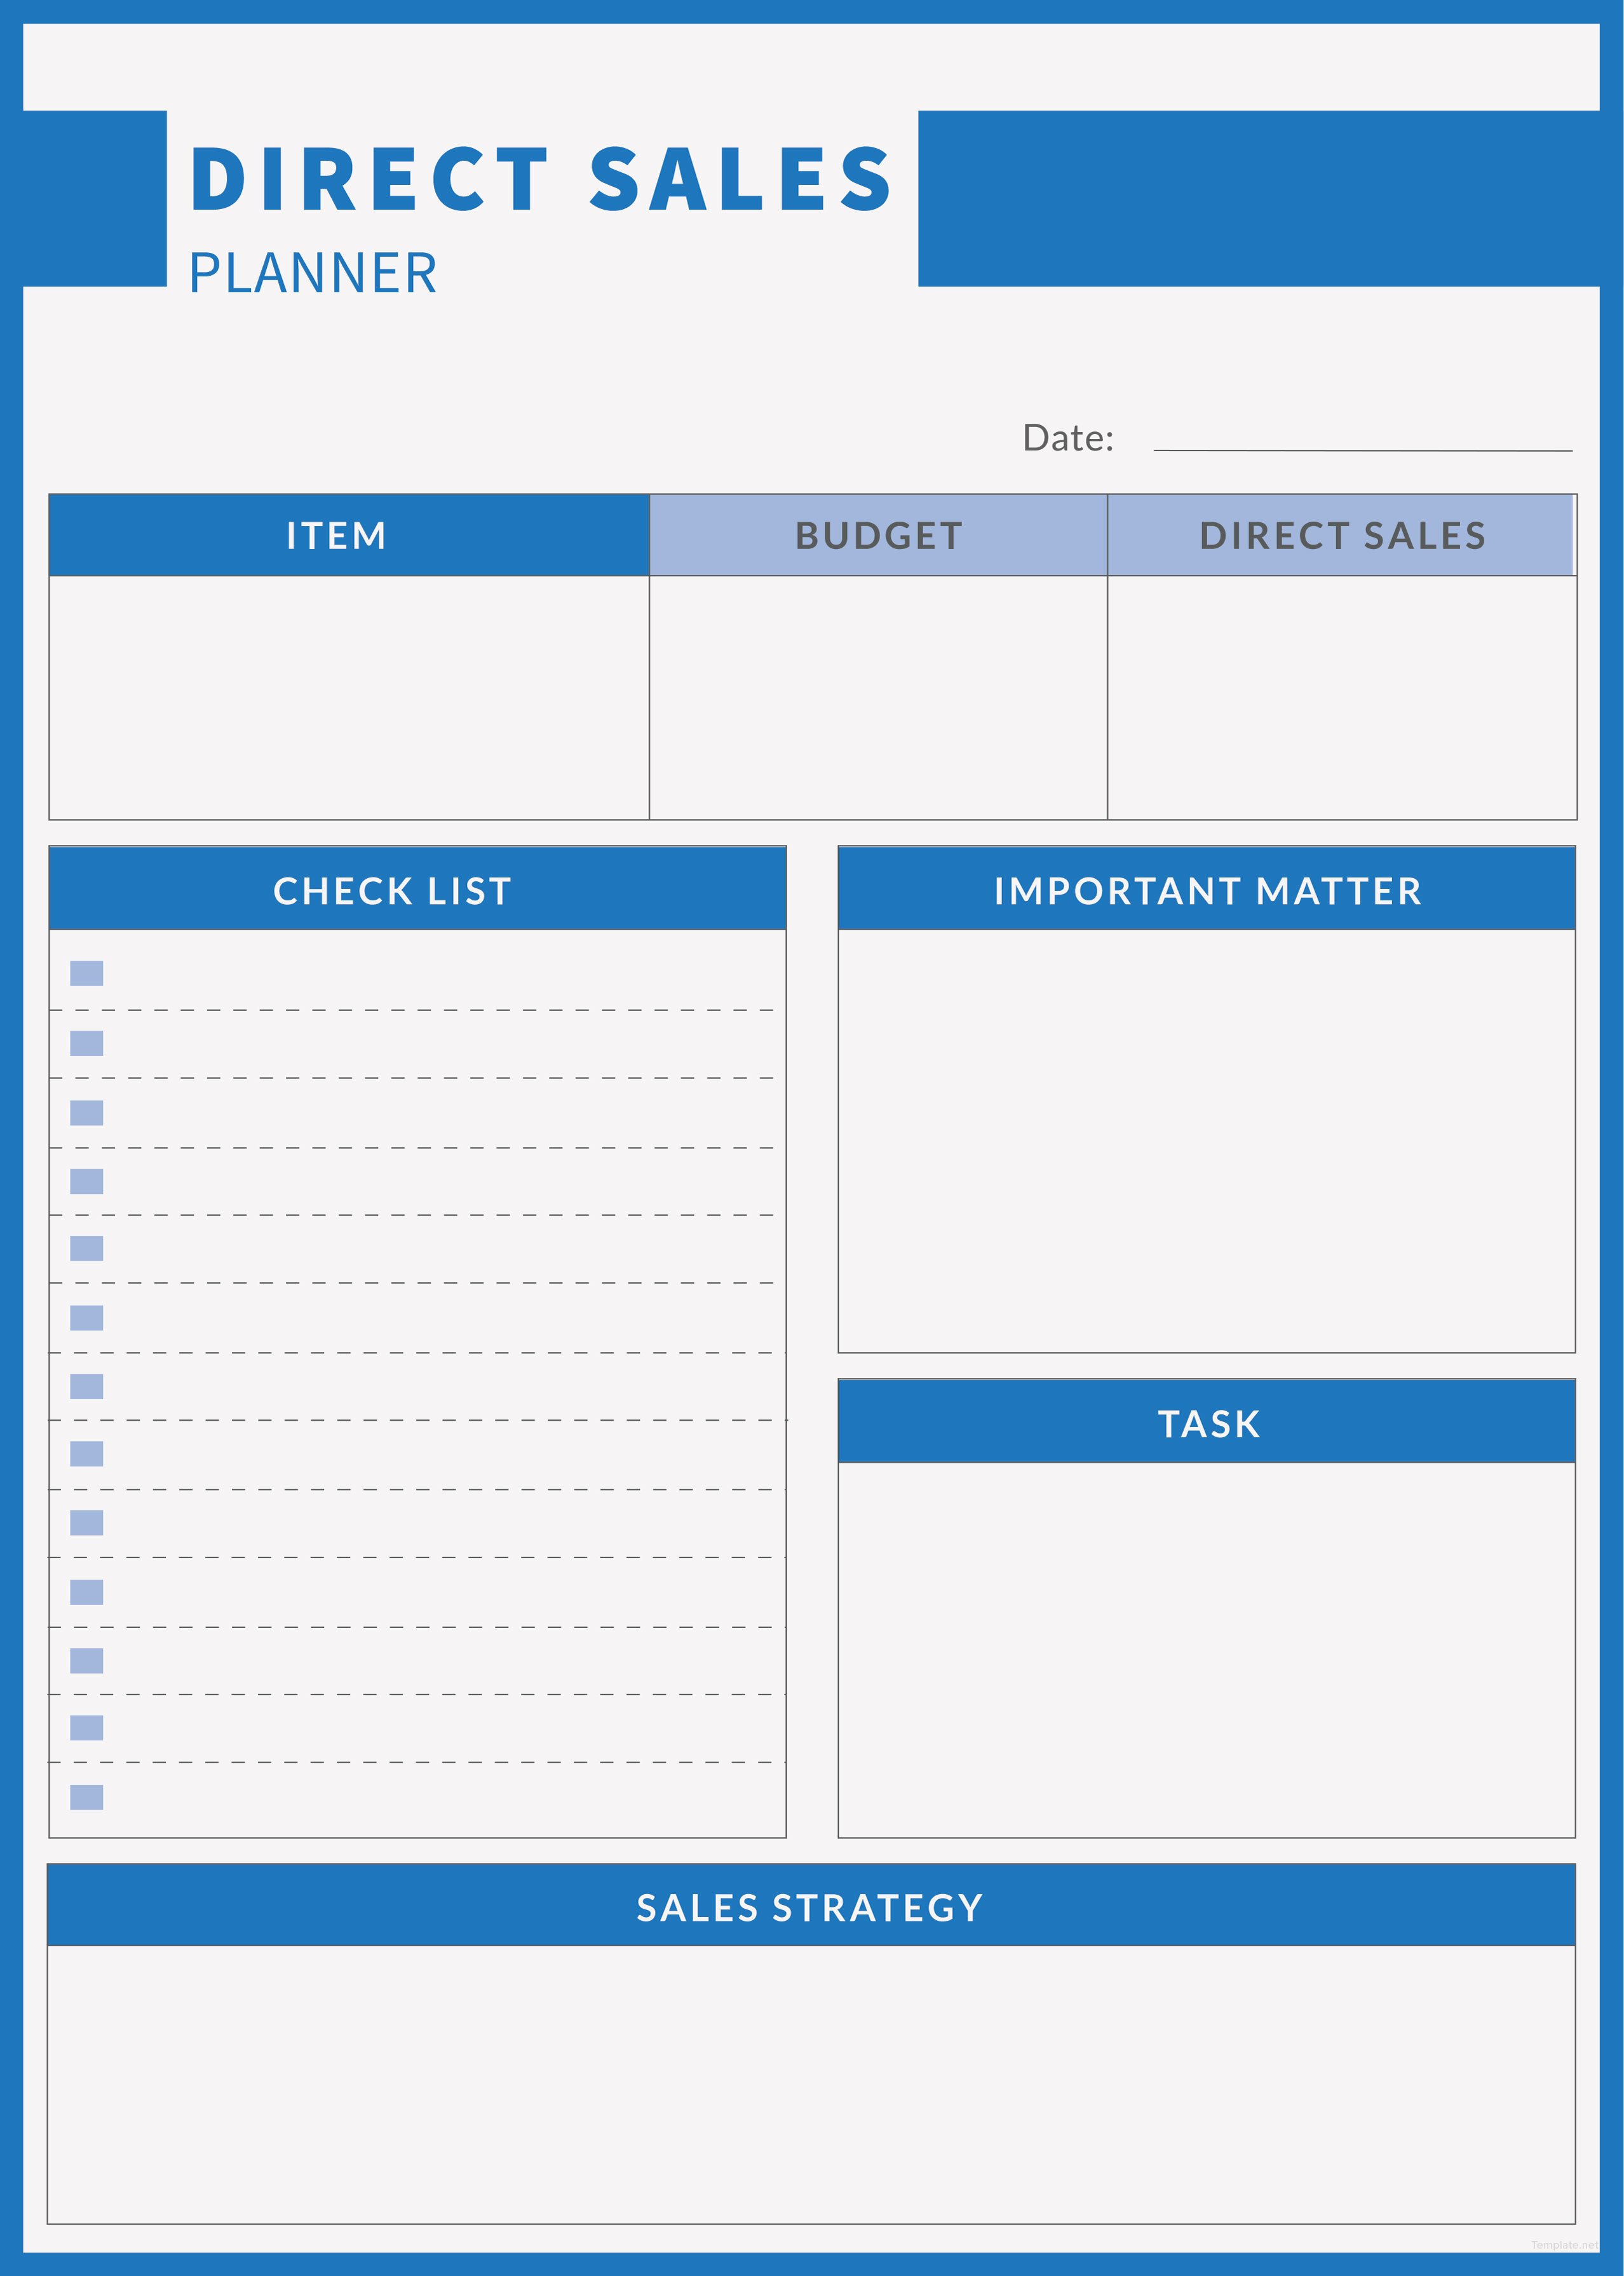 free-direct-sales-planner-template-in-adobe-photoshop-adobe